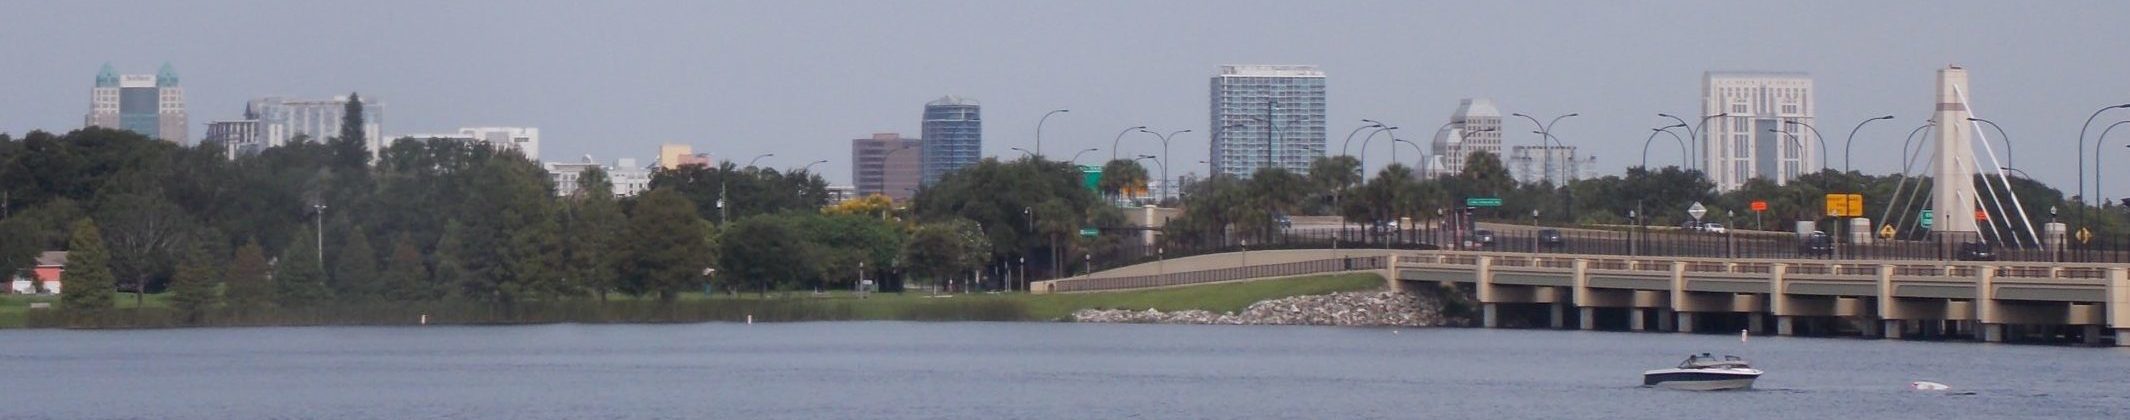 Lake underhill and down town skyline